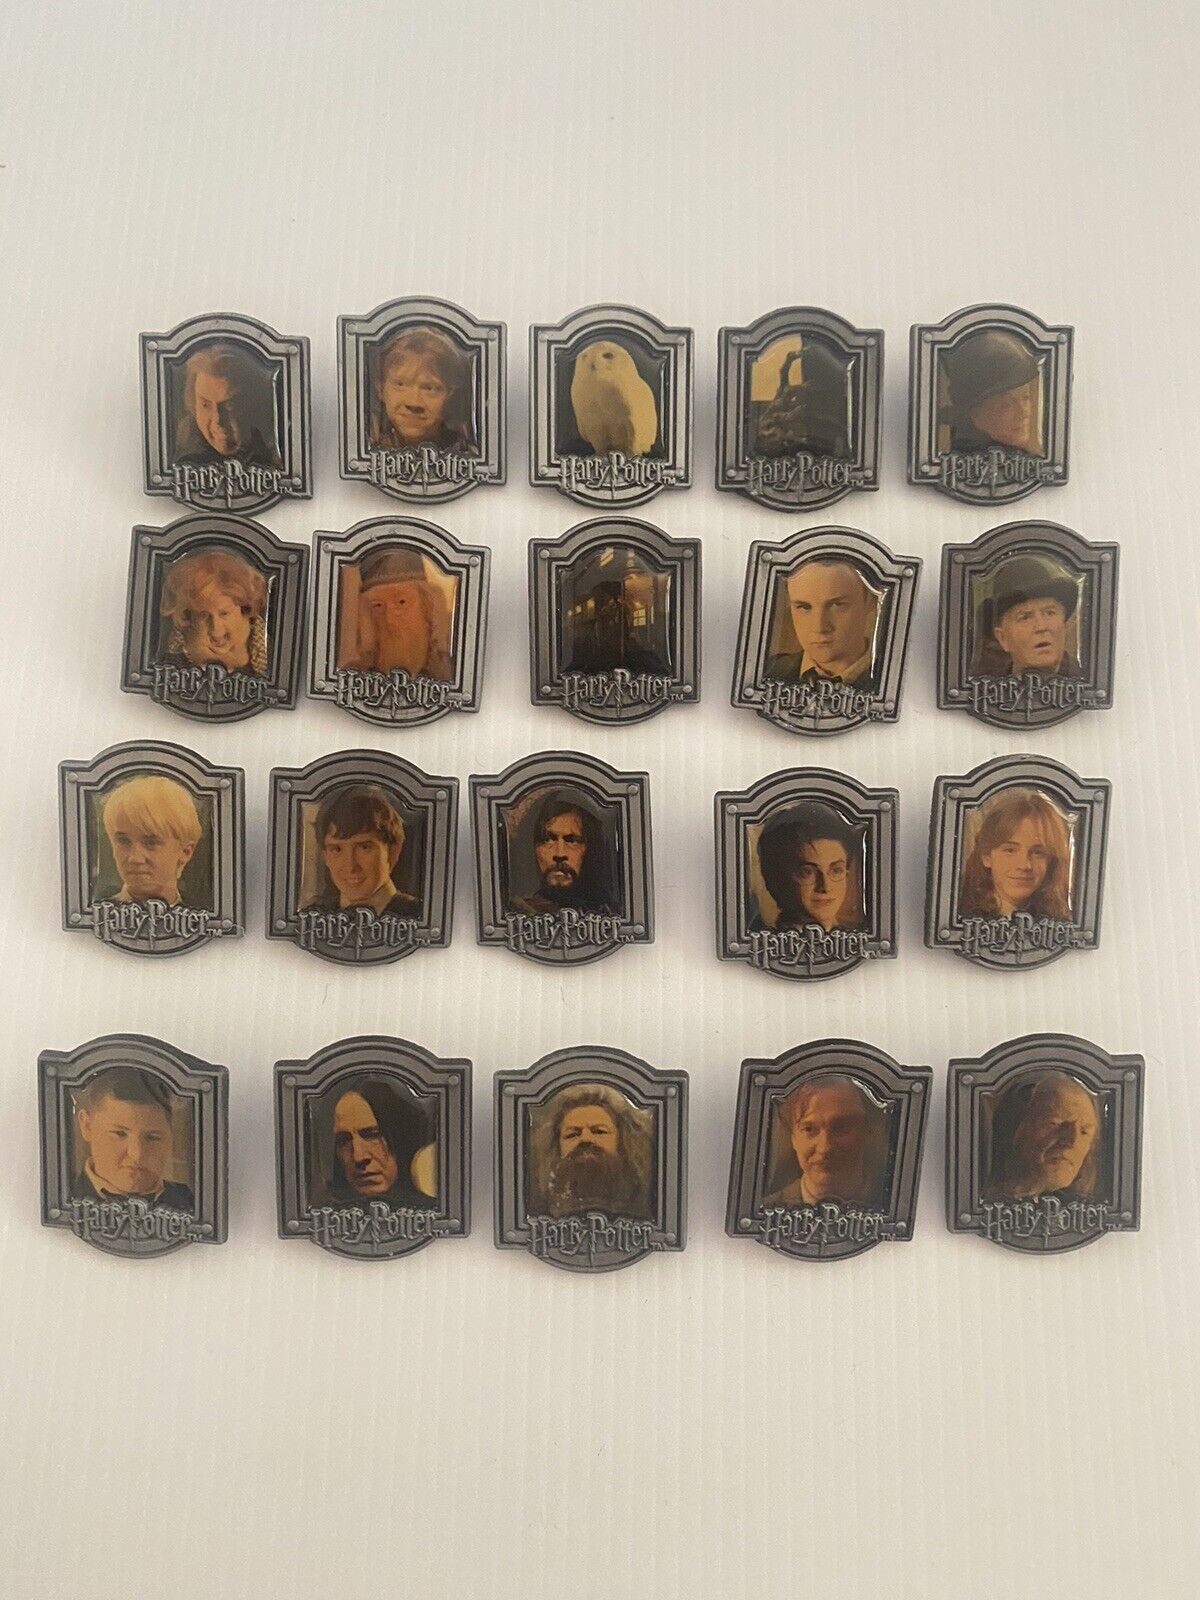 Harry Potter and the Prisoner of Azkaban Official 2004 Movie Pin Collection x 20